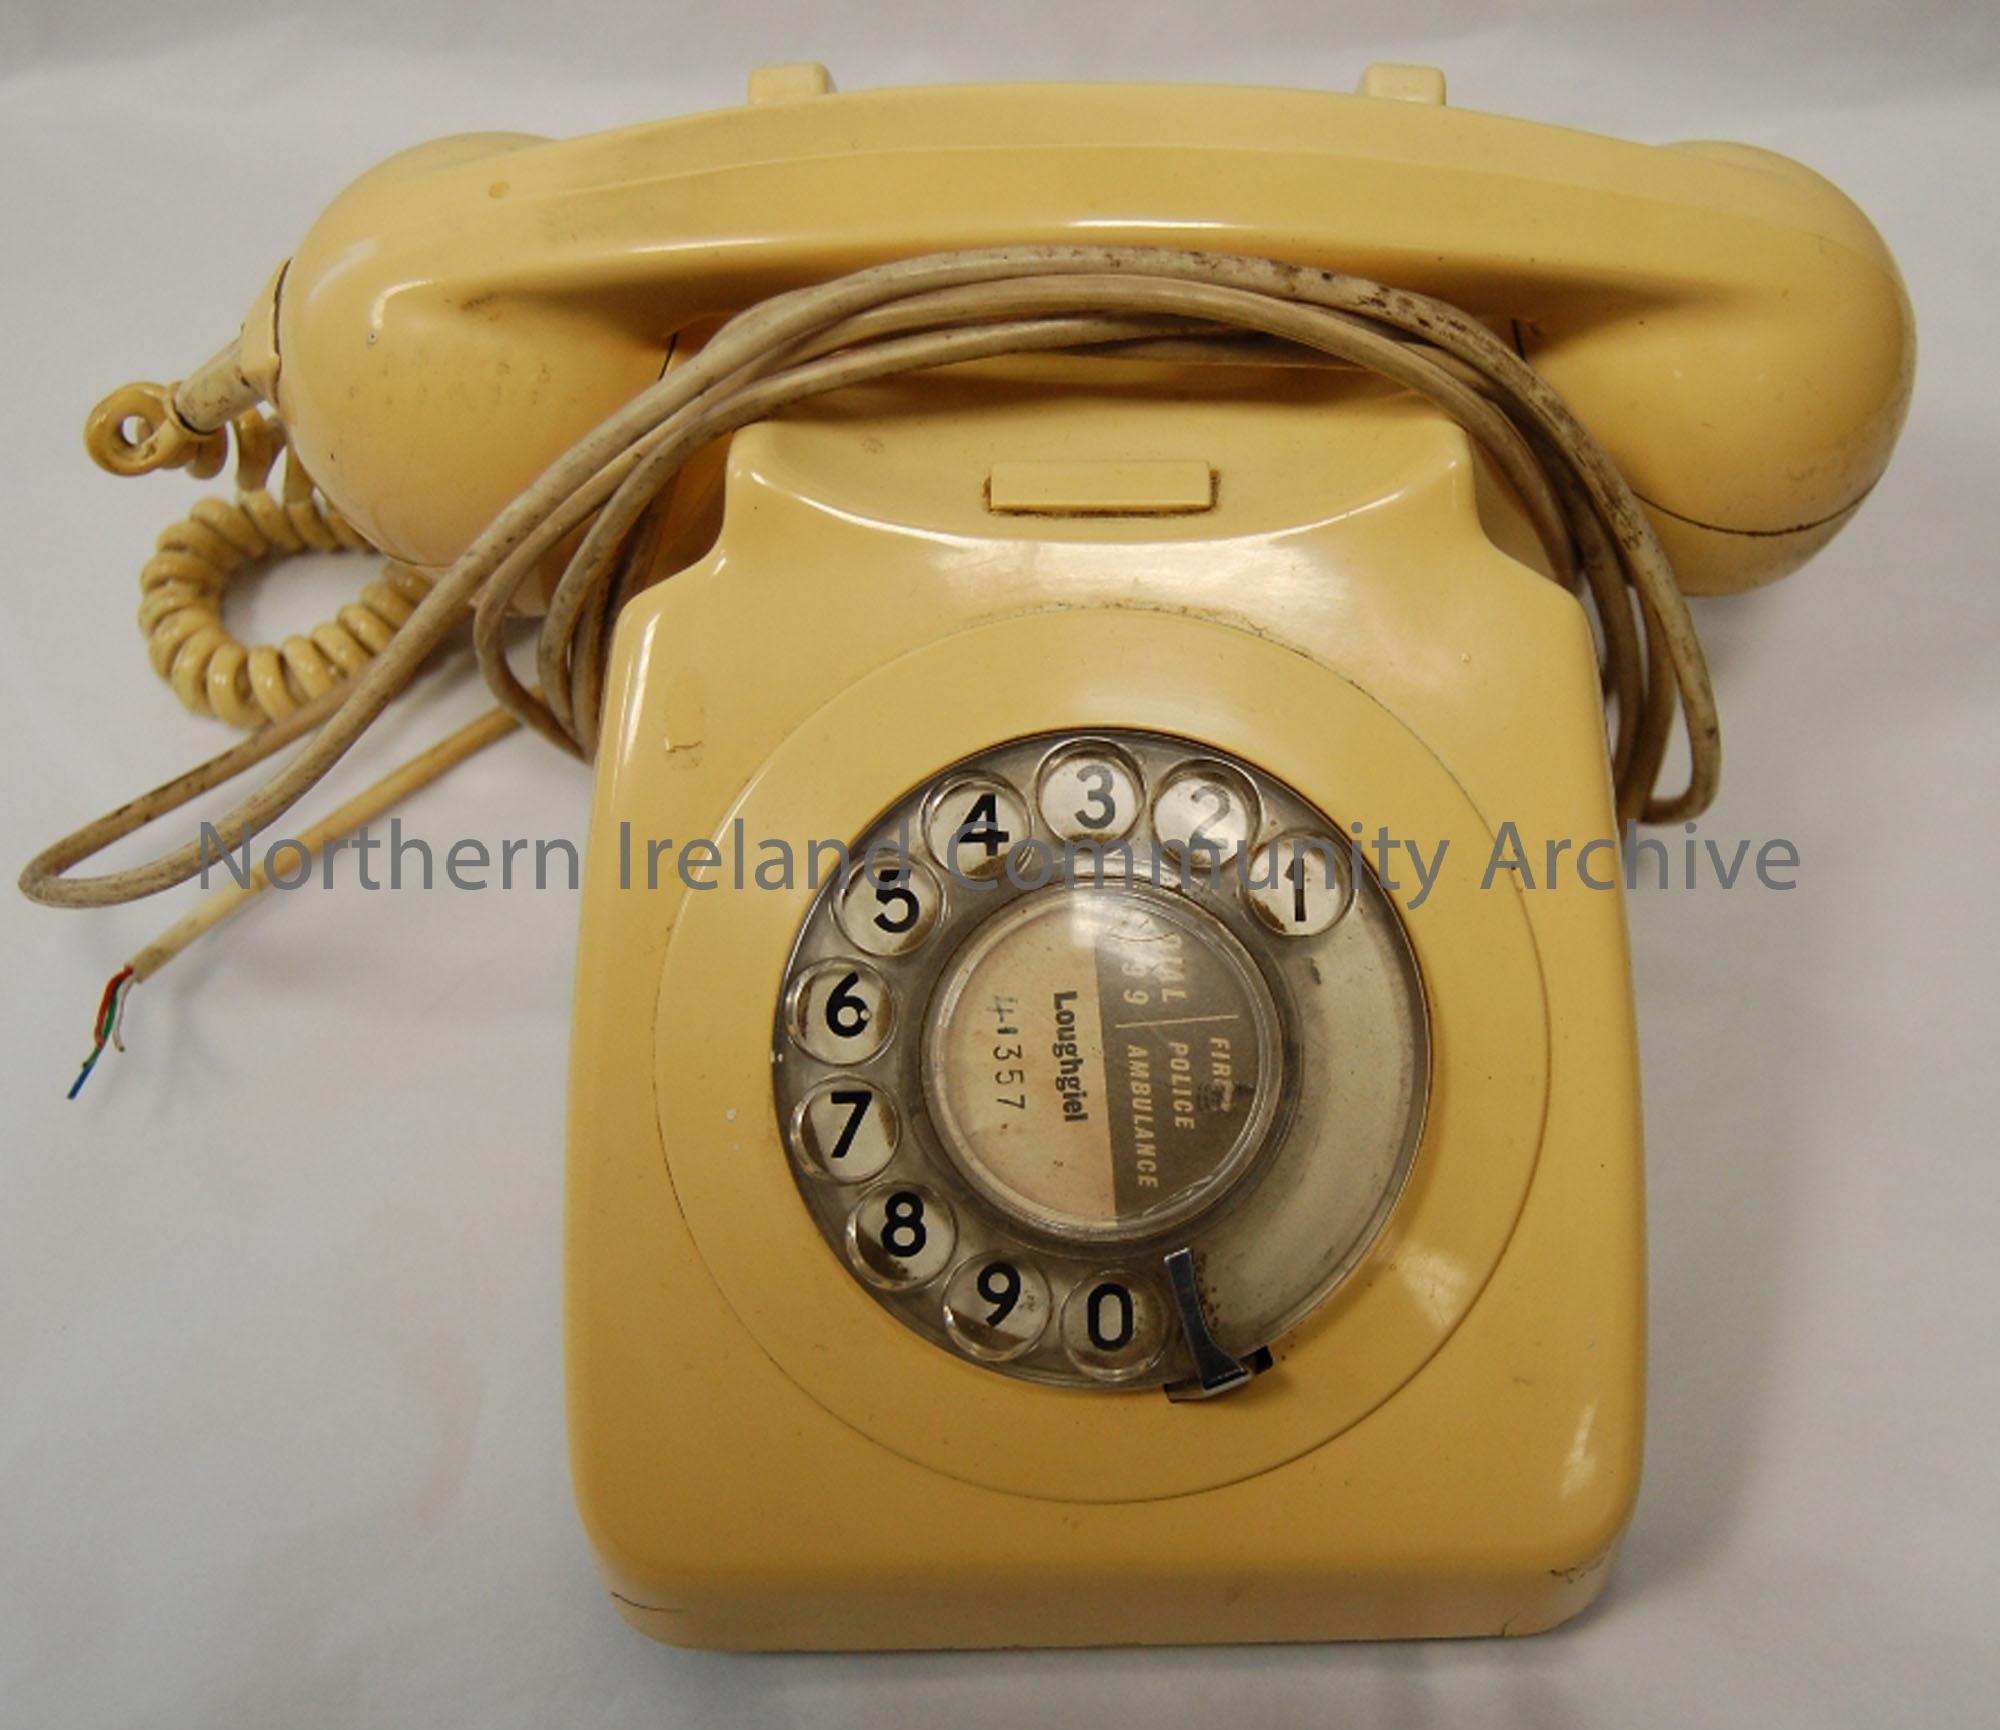 Cream telephone with finger dial